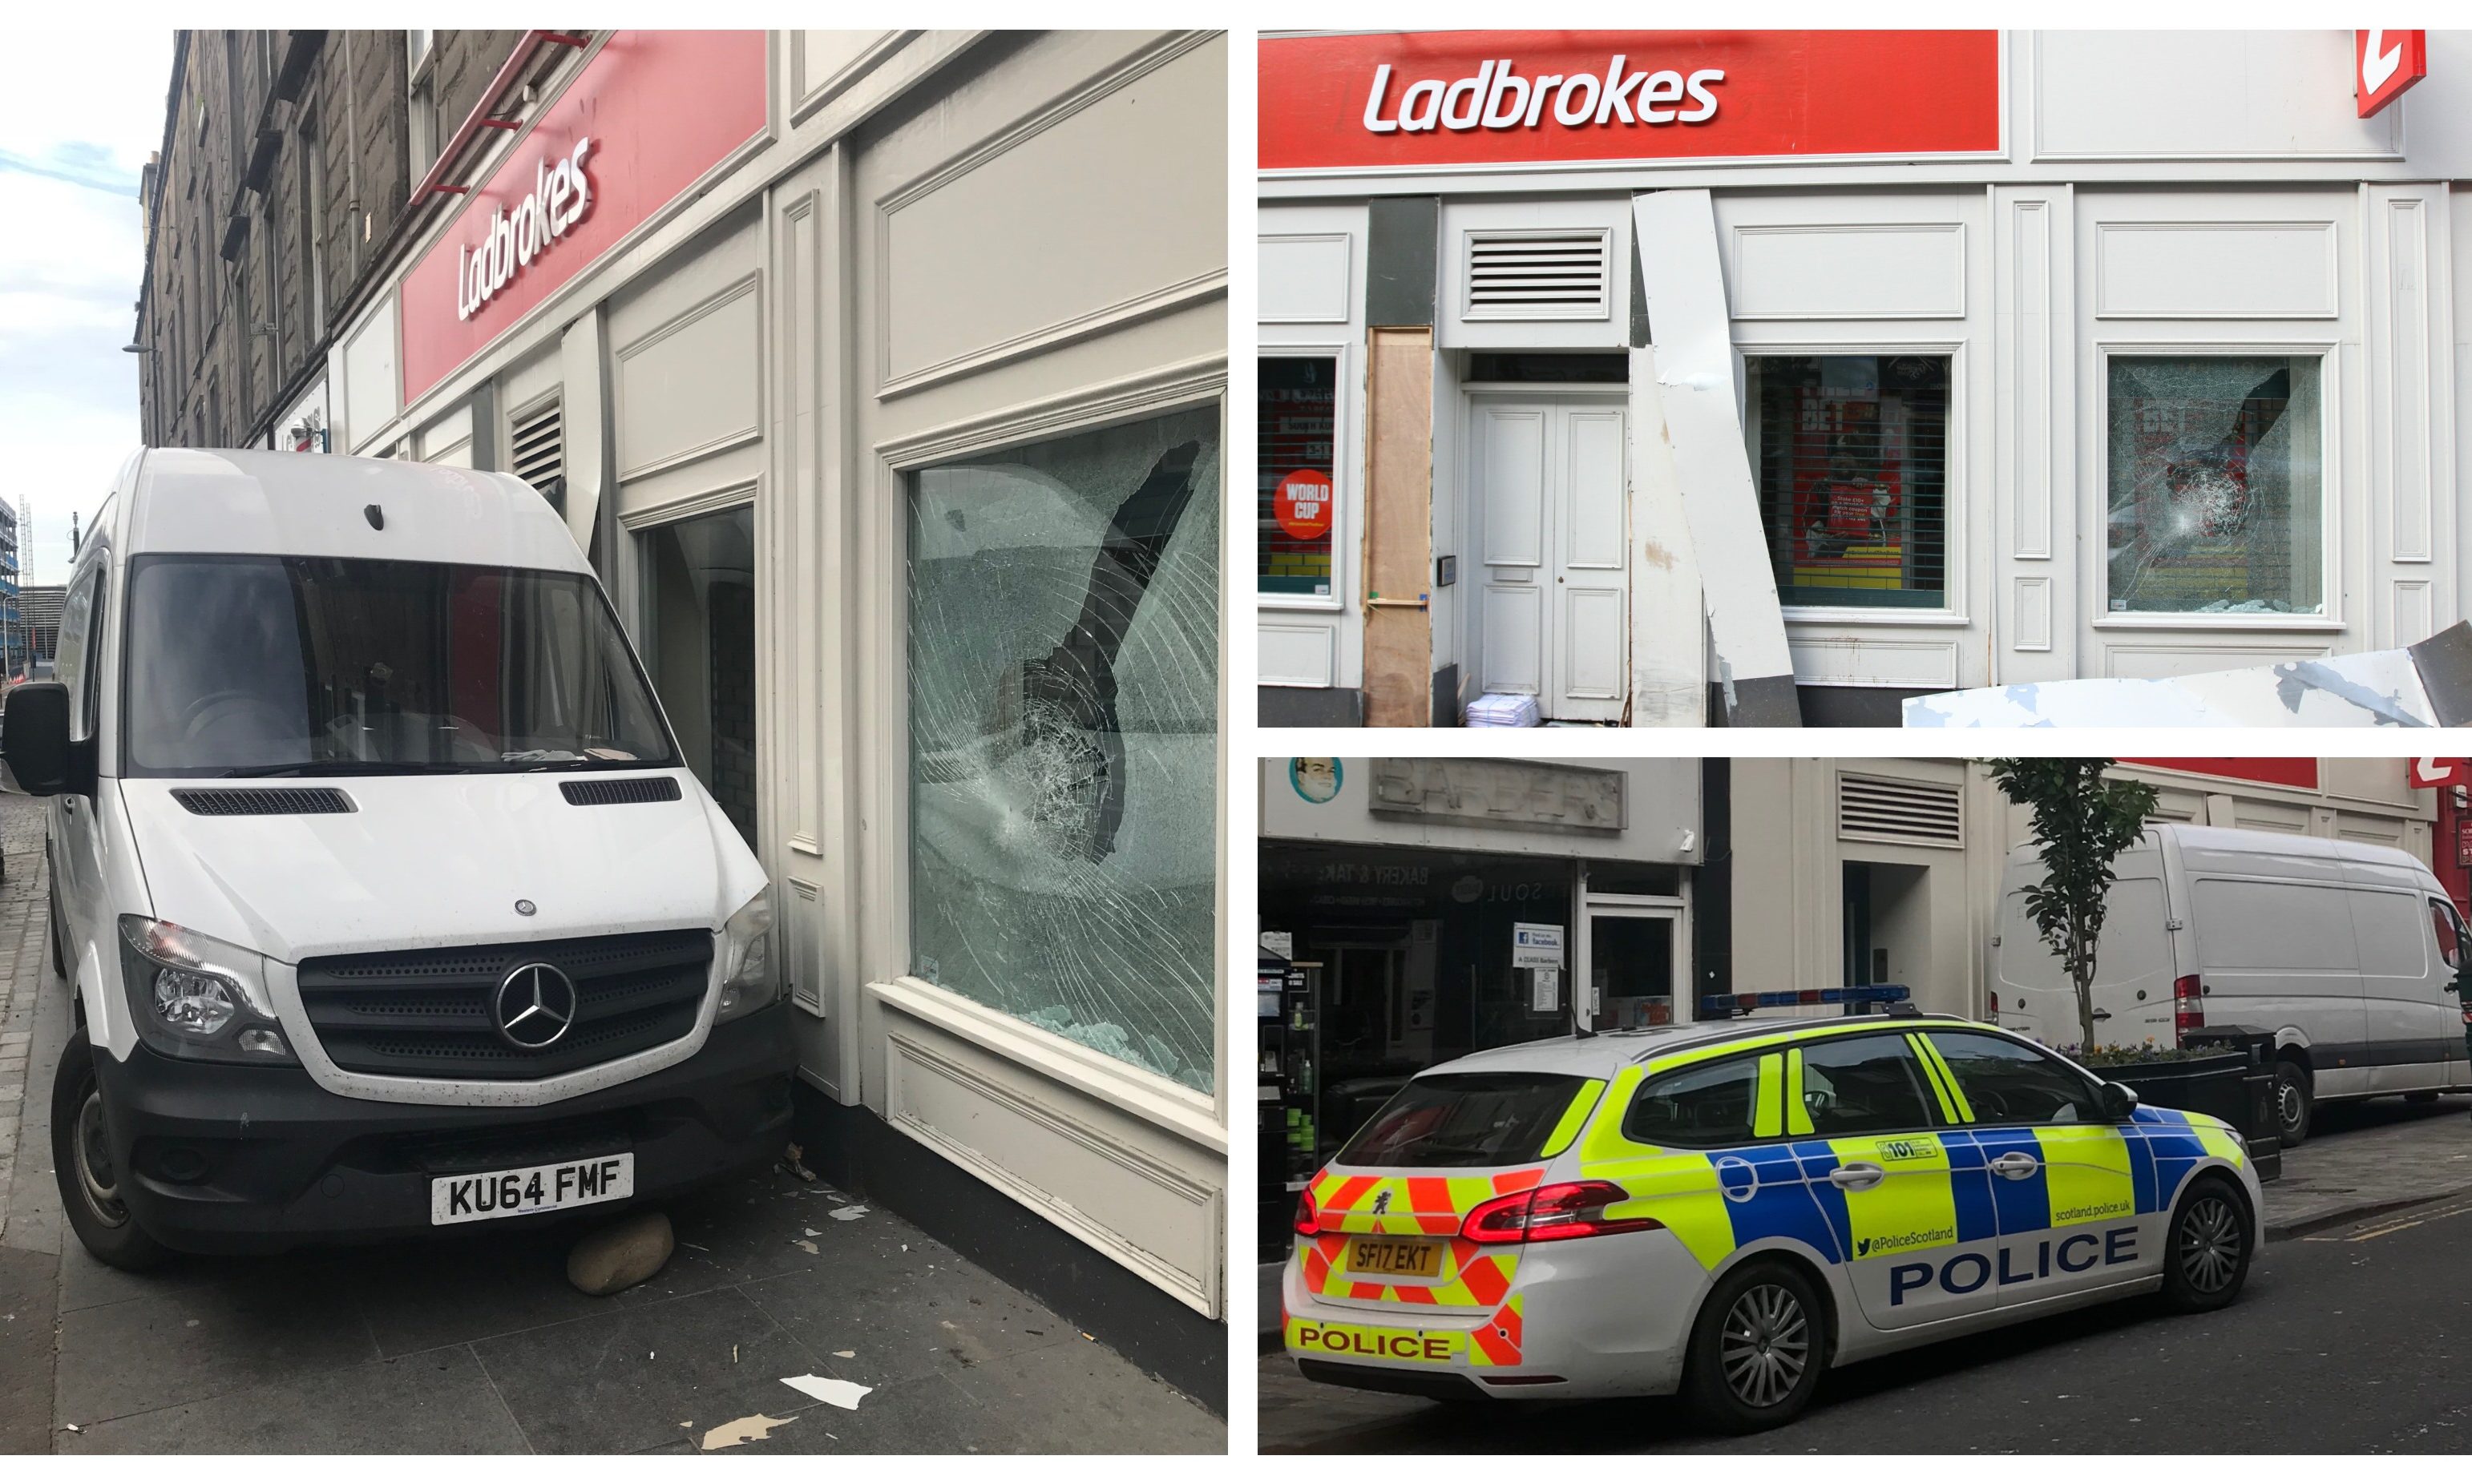 The scene at Ladbrokes on Union Street following the incident.